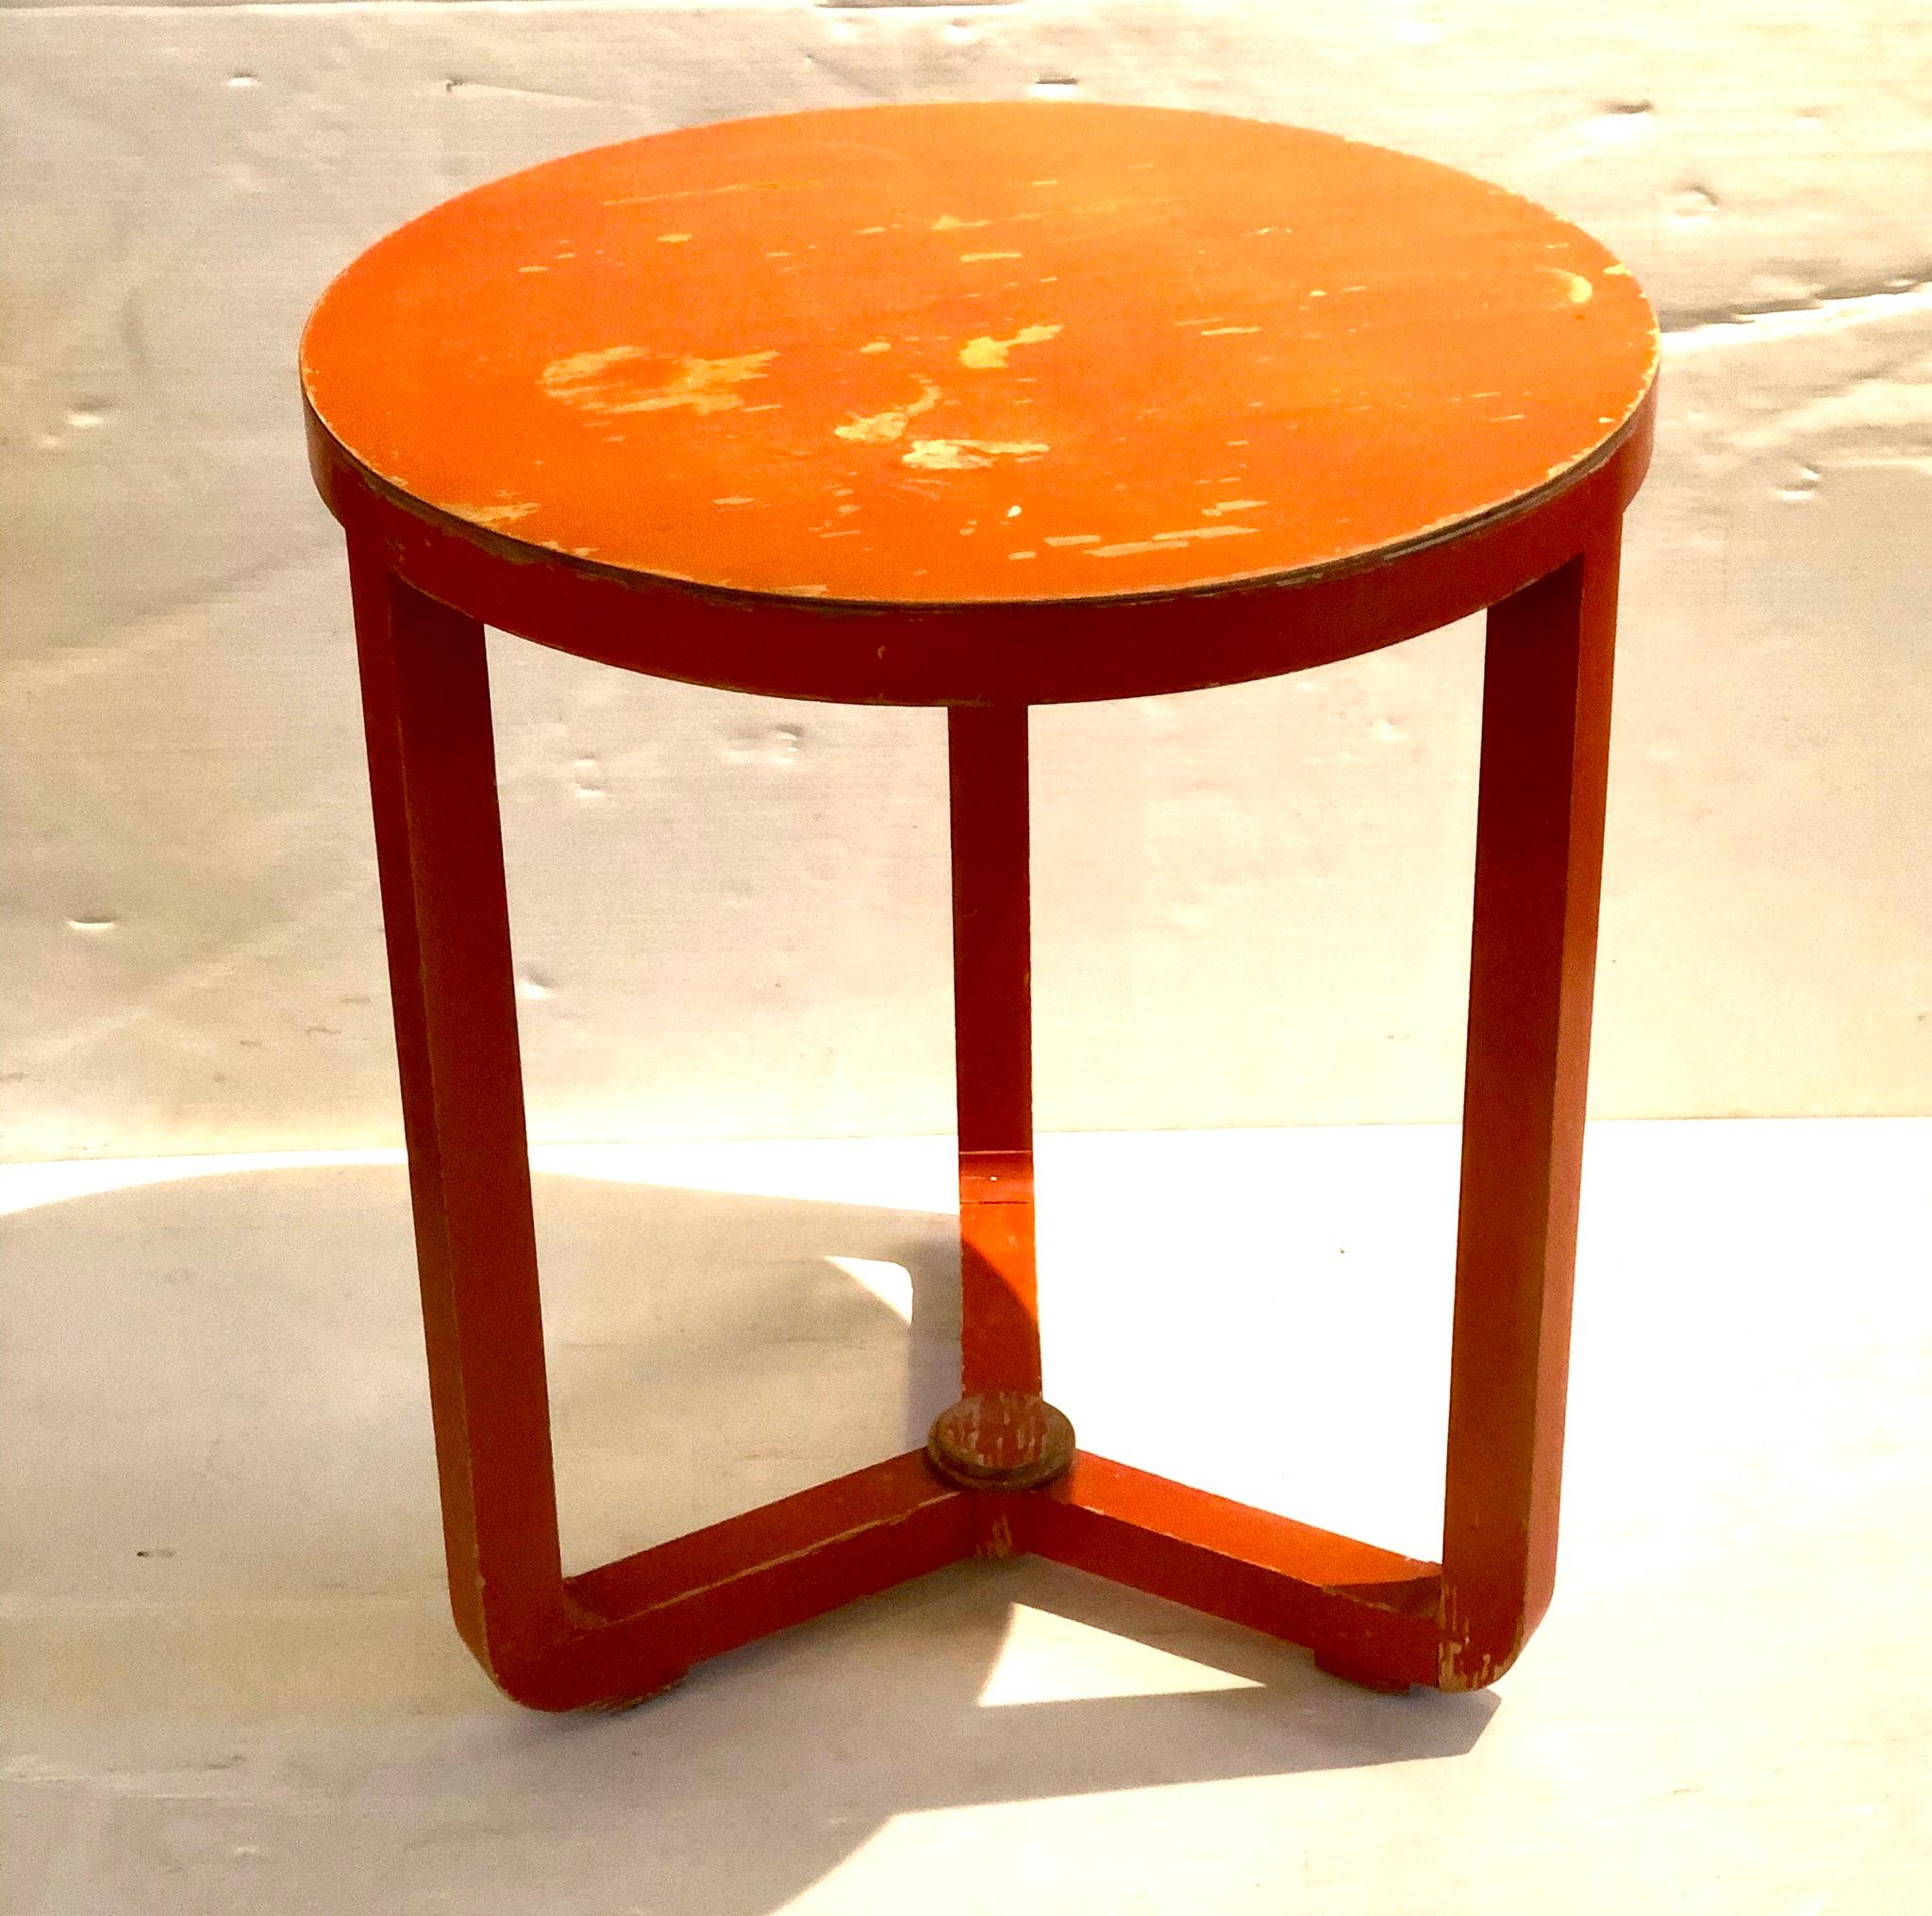 Beautiful well constructed small orange patinated nicely worn cocktail table, circa 1940s solid and sturdy with scratches and worn due to age but gives great character to the piece, in the style of Alvar Aalto. There is stamped on the bottom N. I